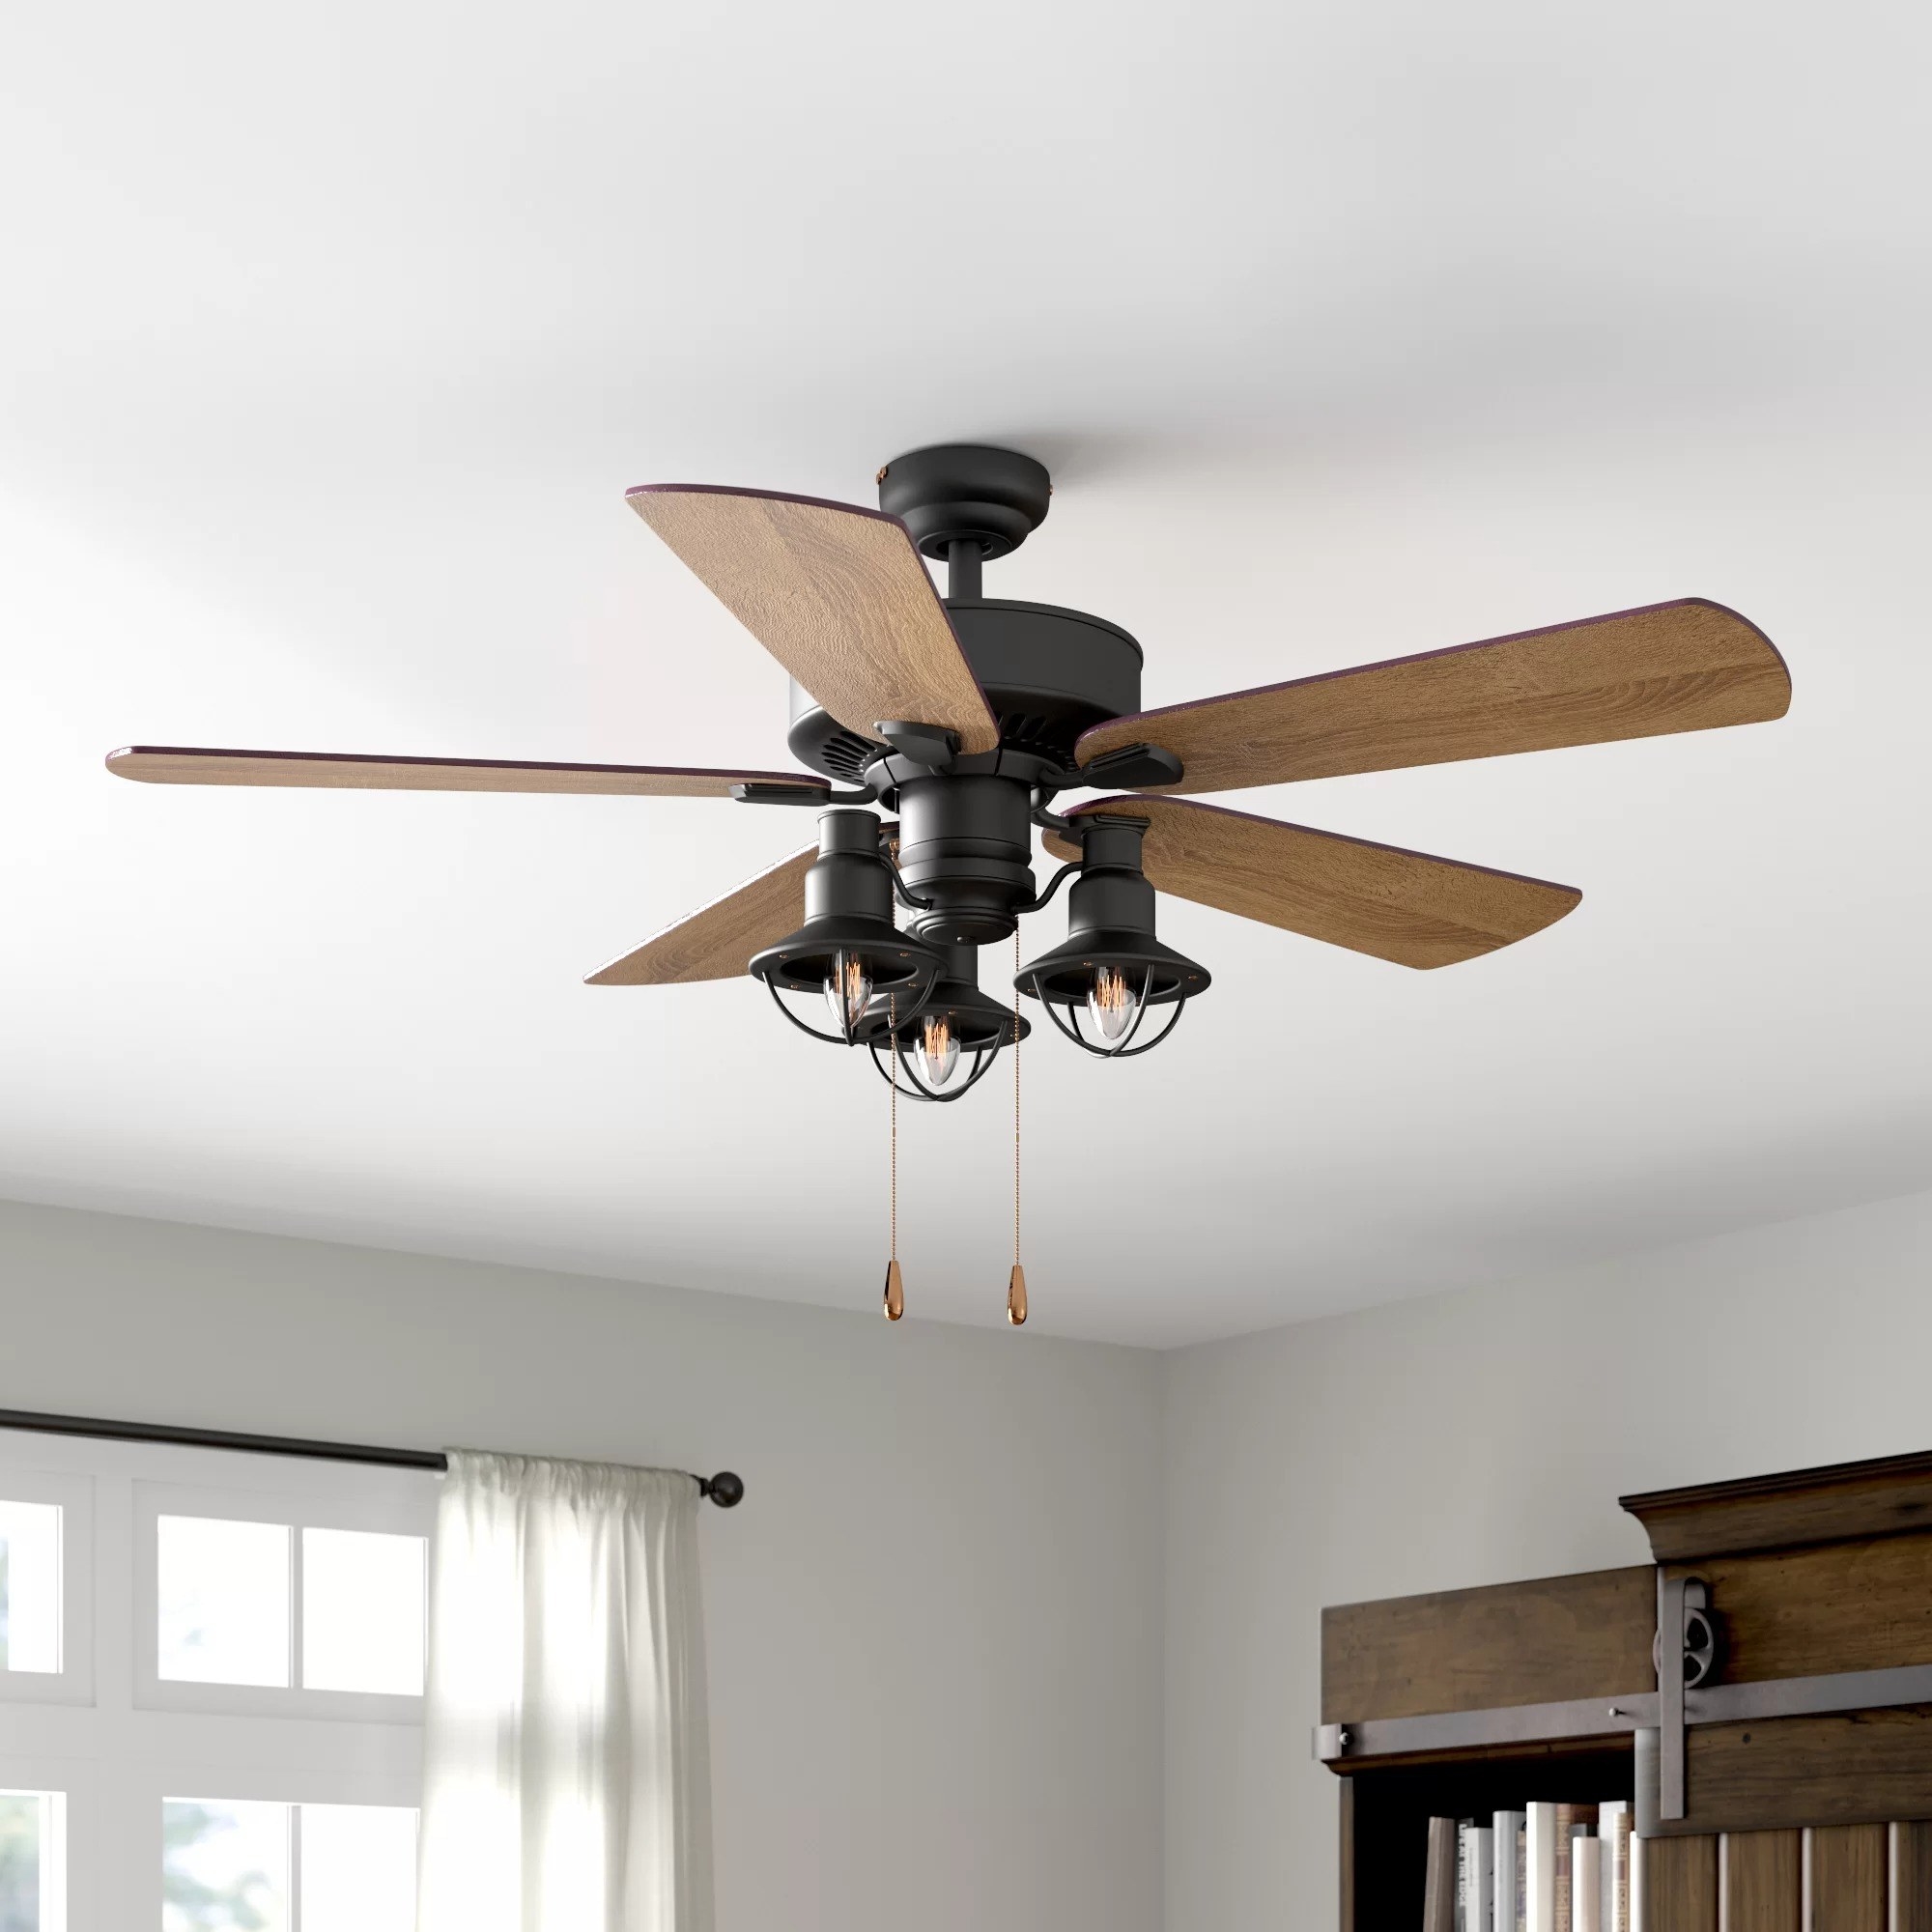 The ceiling fan with five blades and three lightbulbs in a living